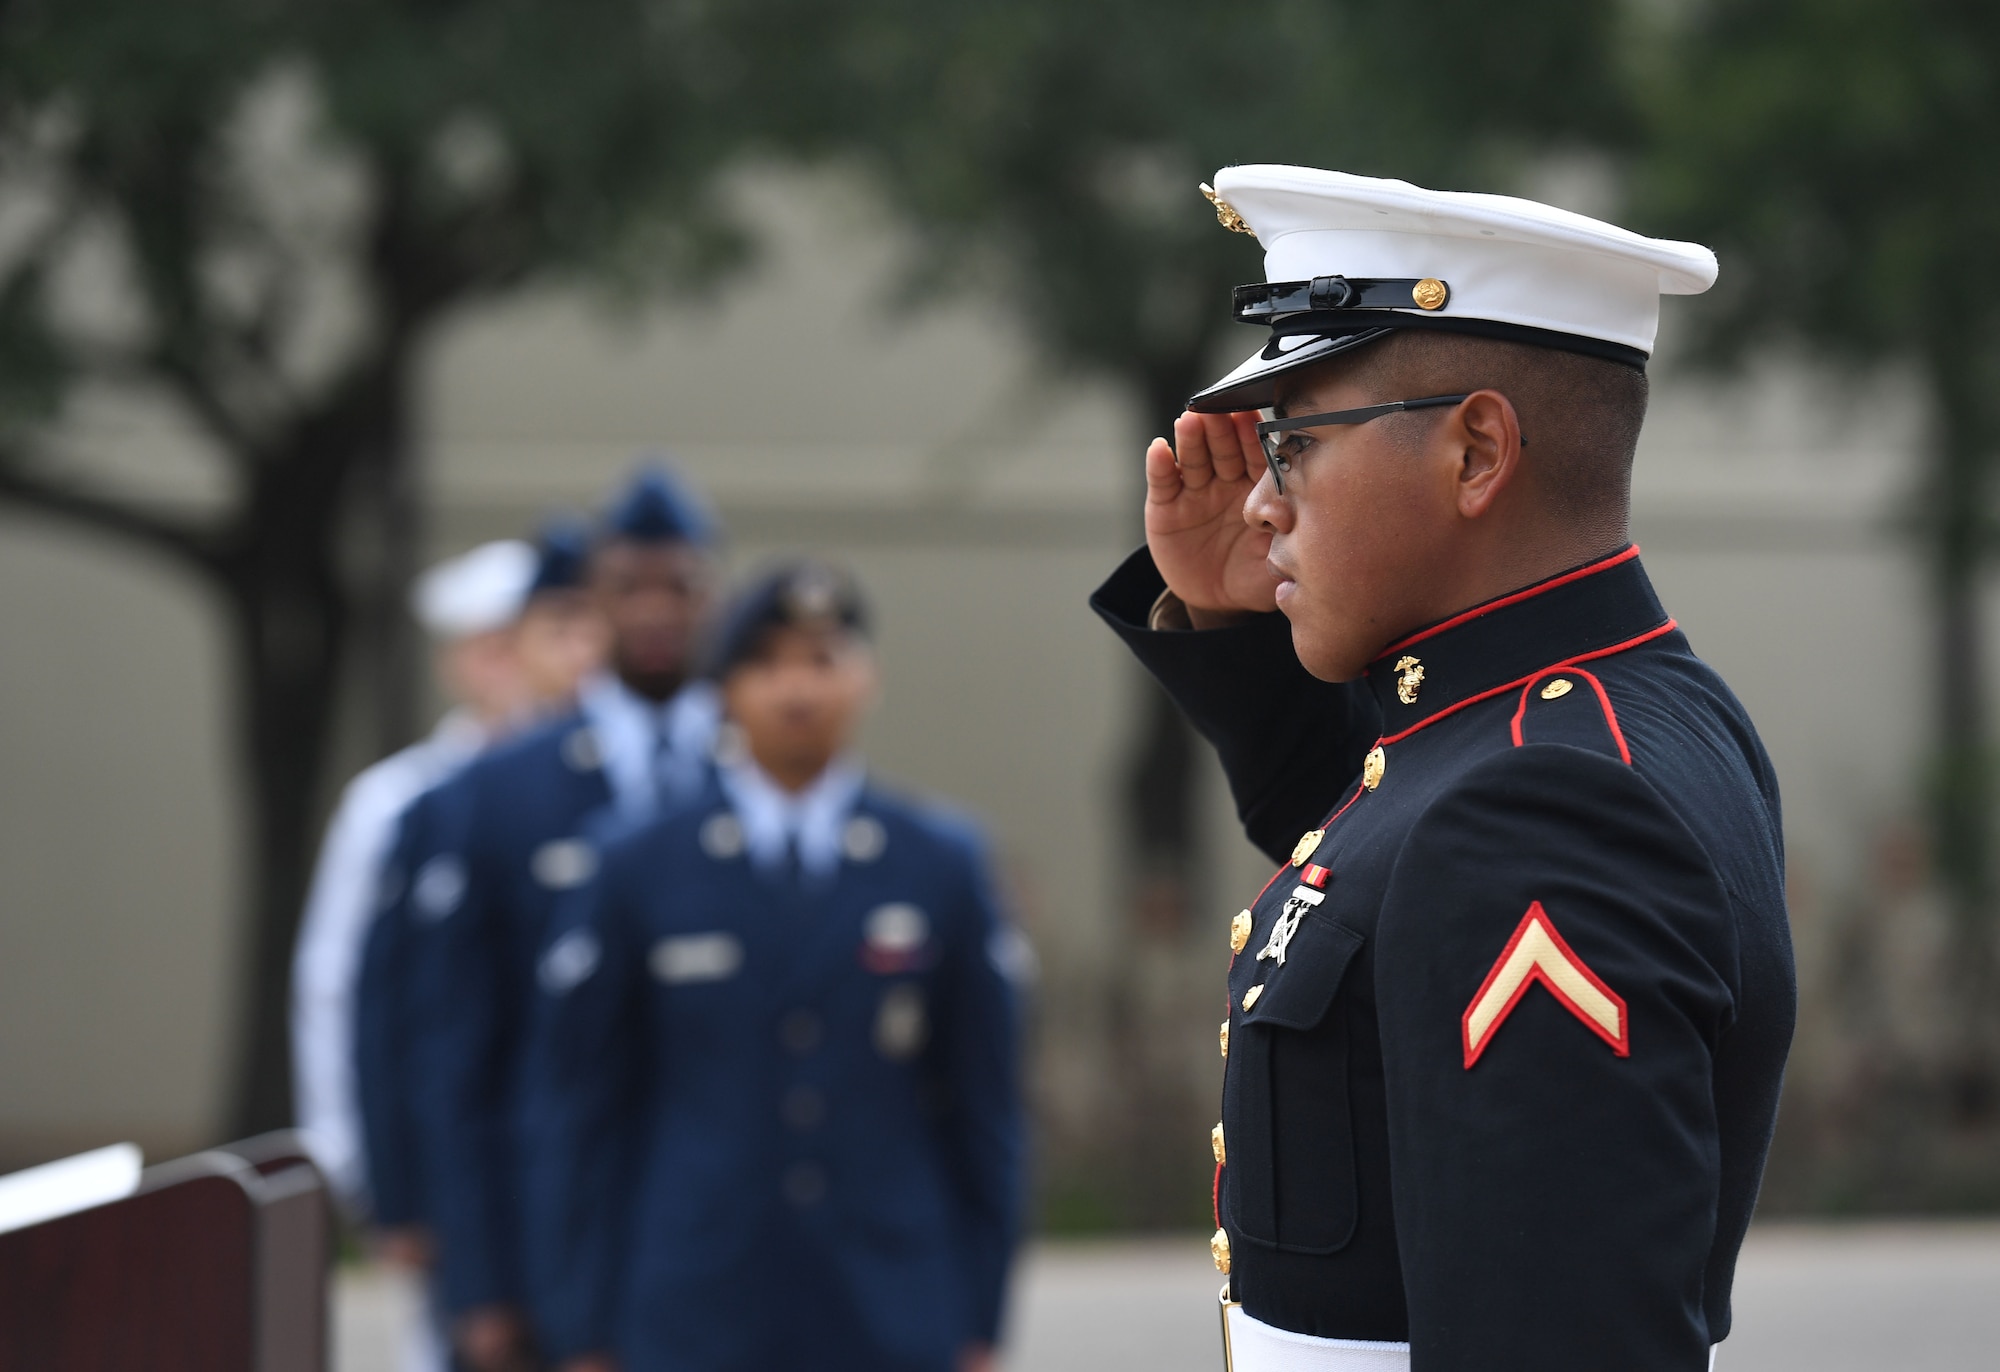 U.S. Marine Private 1st Class Diego MoralesCabrera, Keesler Marine Detachment student, renders a salute during a 9/11 ceremony in front of the 81st Training Wing headquarters building at Keesler Air Force Base, Mississippi, Sept. 9, 2022. The event honored those who lost their lives during the 9/11 attacks. (U.S. Air Force photo by Kemberly Groue)